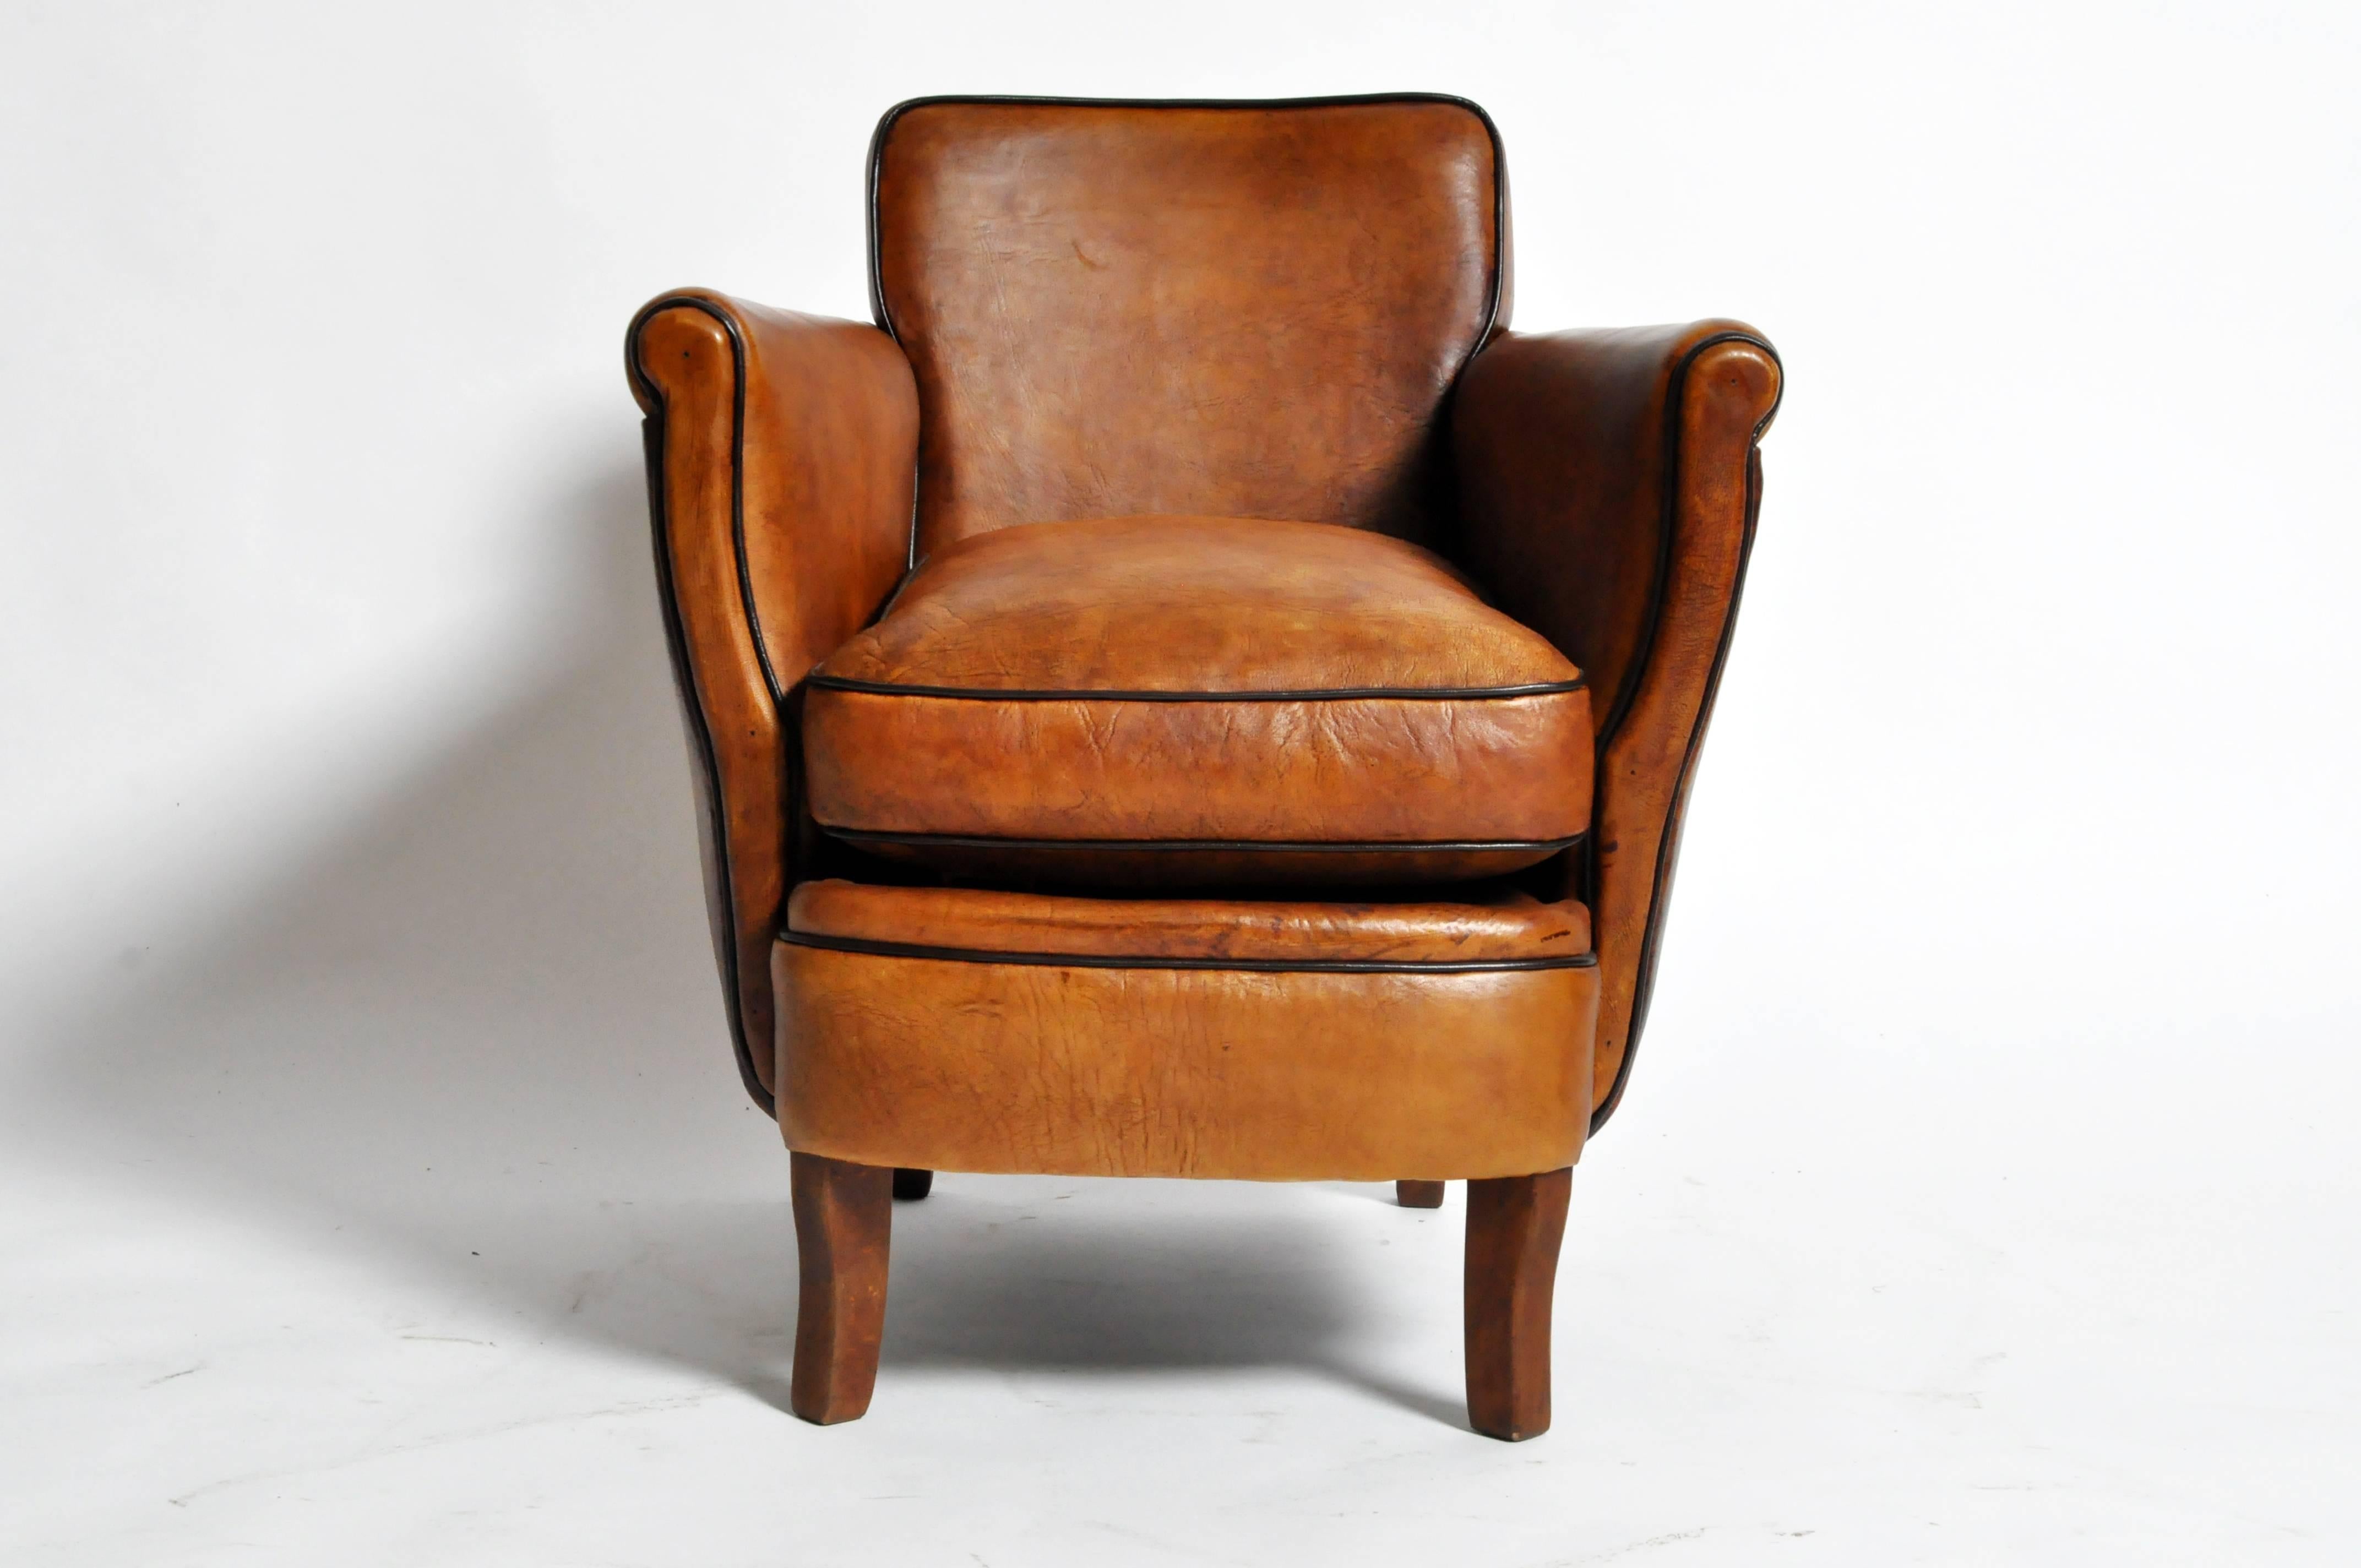 This pair of newly made "Submarine" brown club chairs are from Paris, France and was made from leather and wood. They feature dark brown piping and are highly comfortable.

Additional Dimensions: 17" Seat Width, 20" Seat Depth,